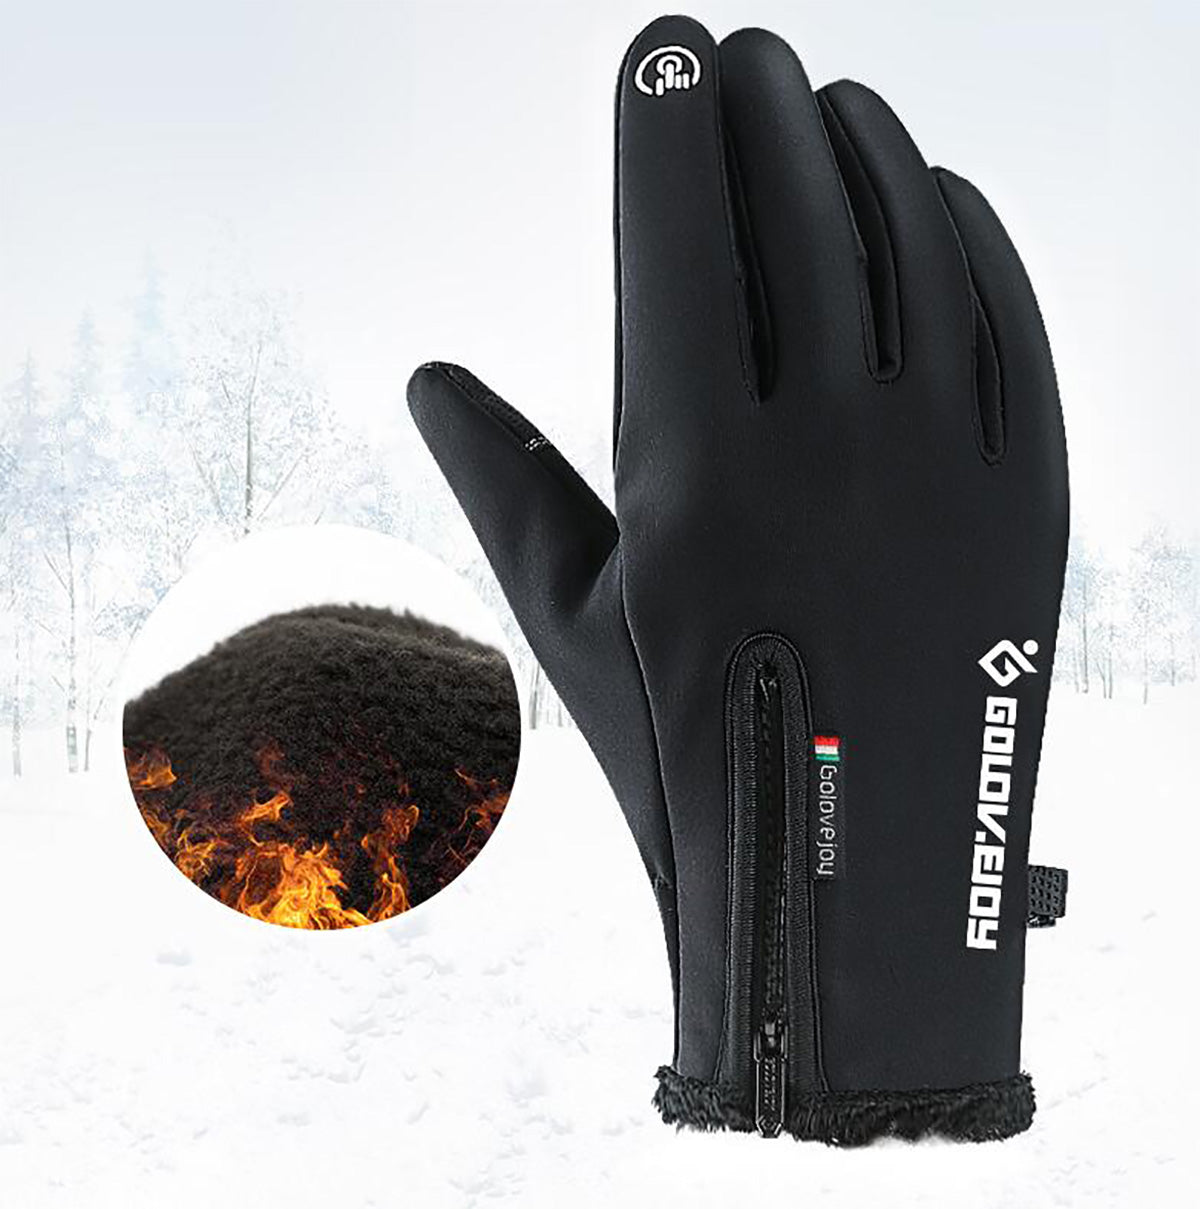 Black Touch Screen Gloves Zipper Thermal Winter Sports Skiing Warm Mittens Waterproof Brown